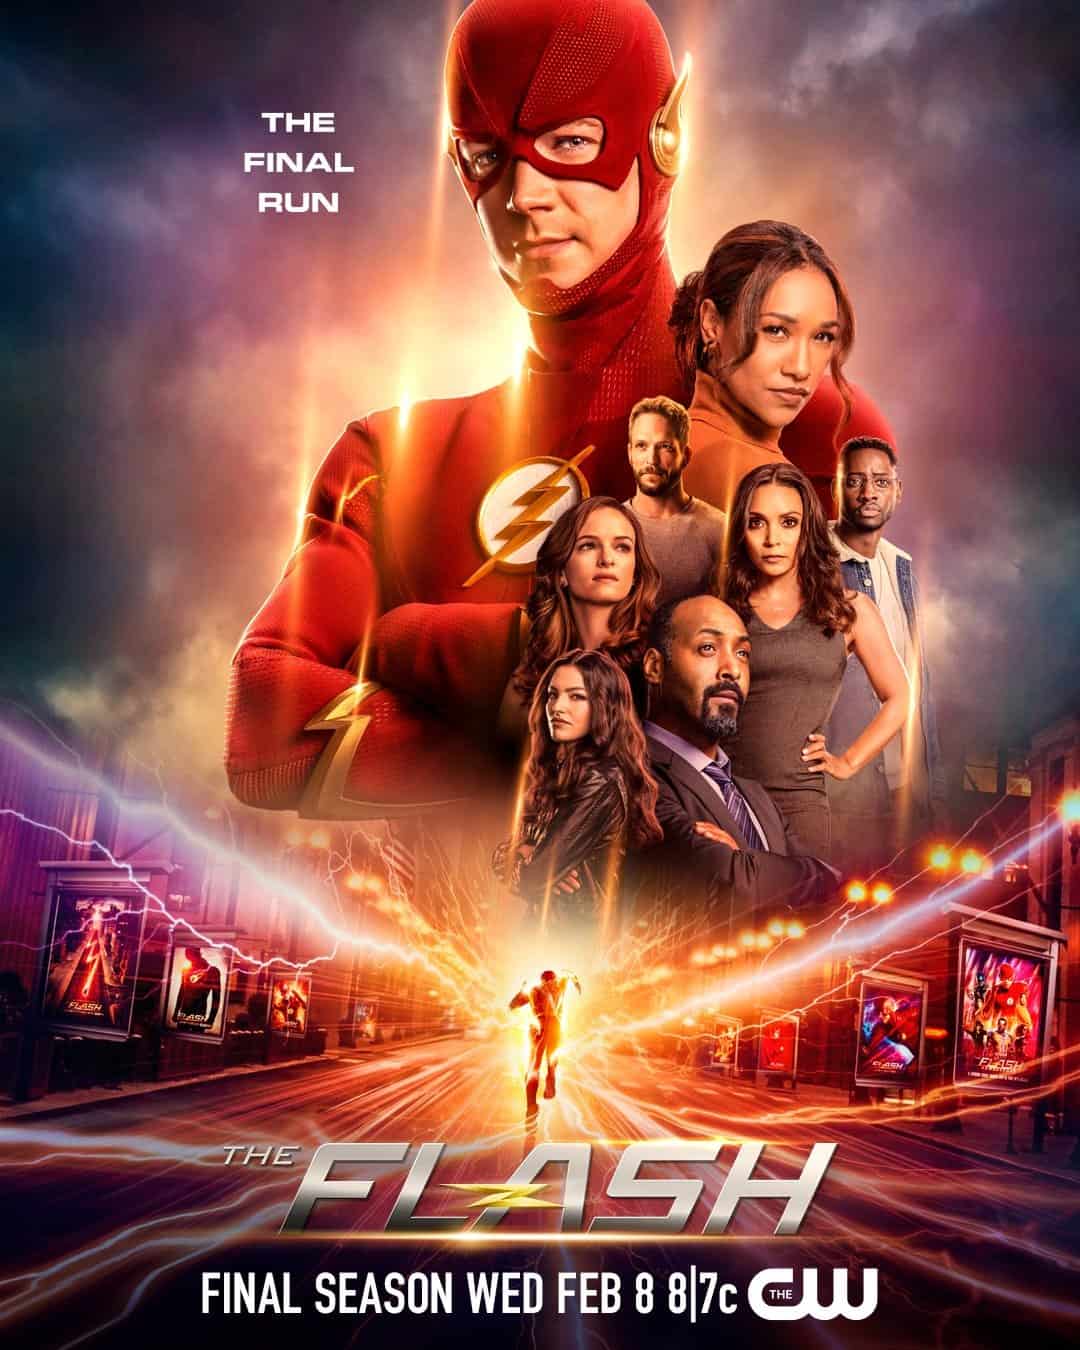 The Cast of the show, The Flash (Credits: IMDb)